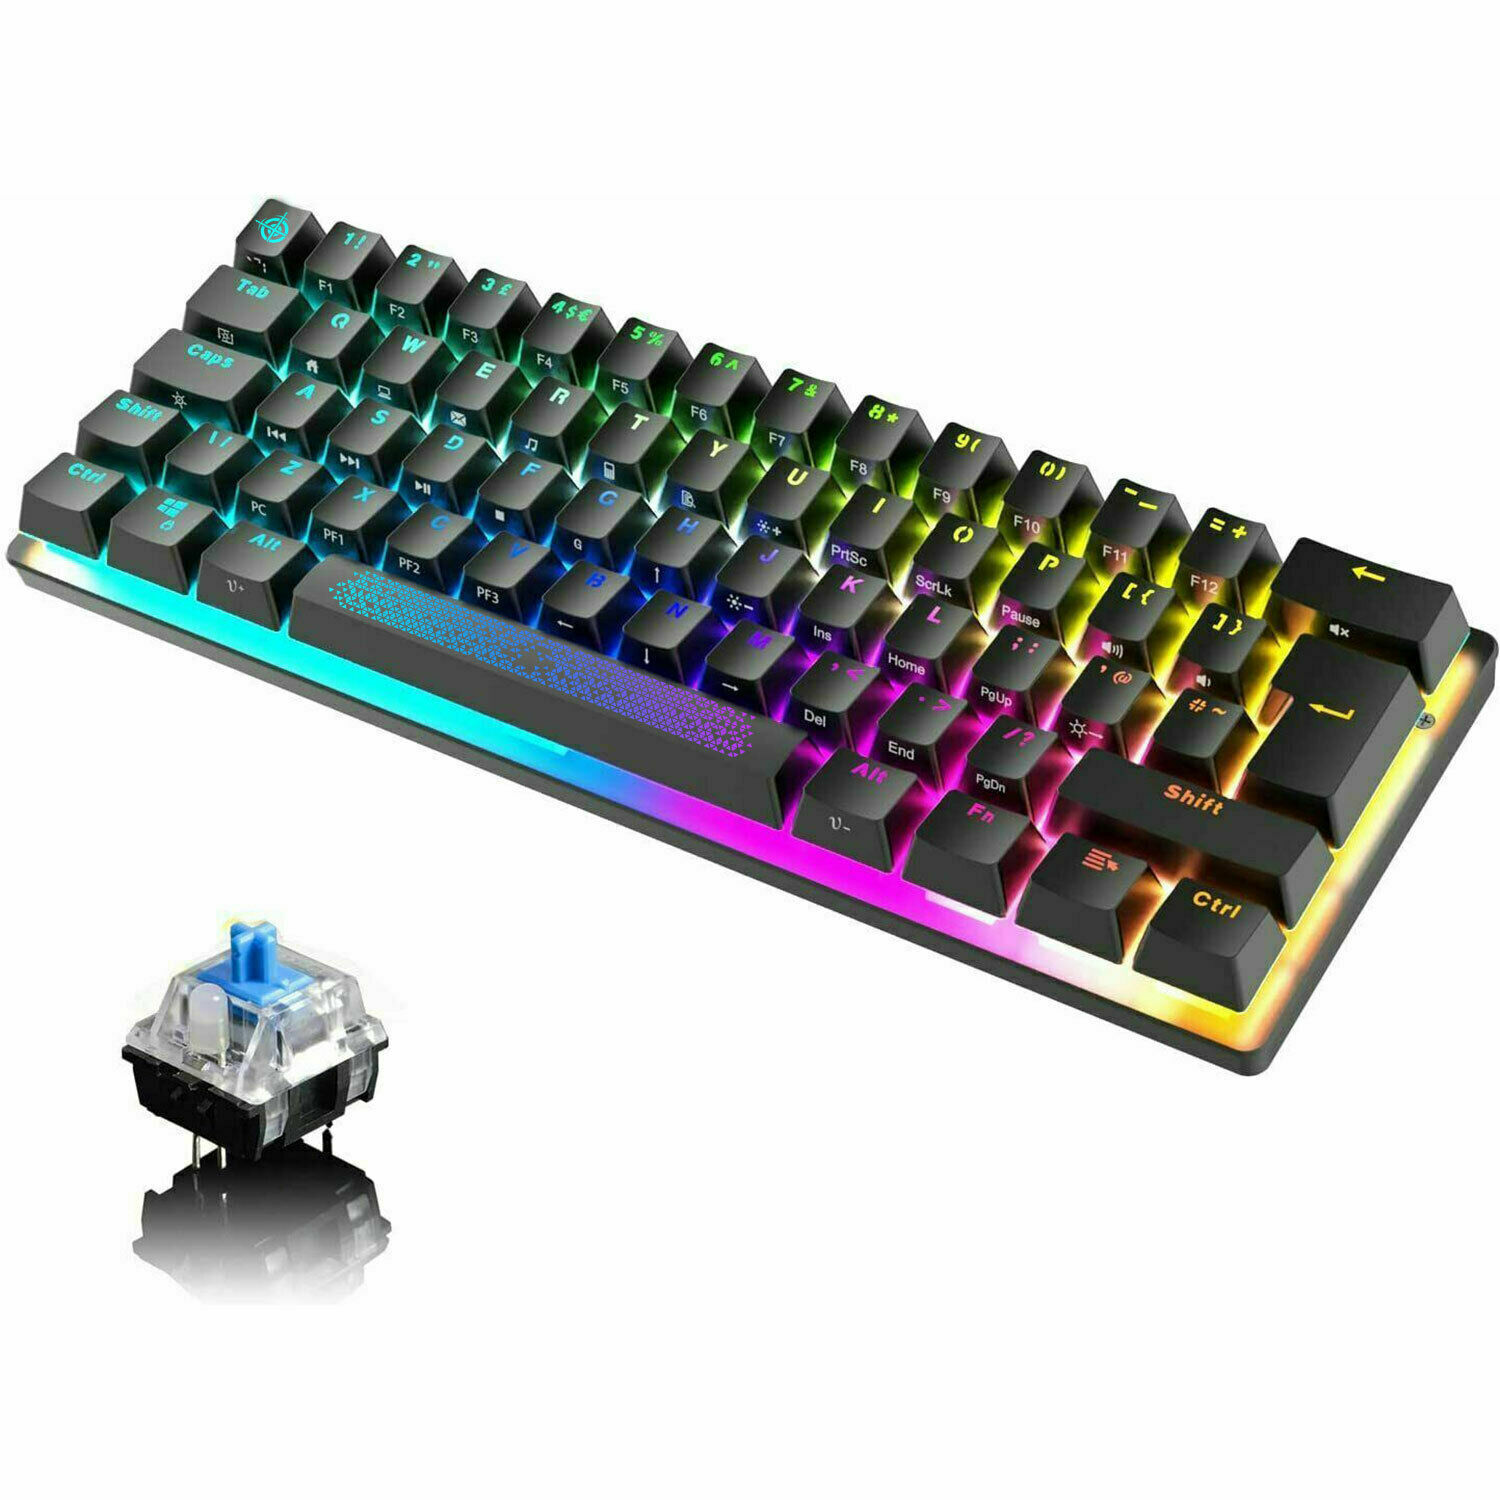 60% Layout Mechanical Gaming Keyboard Wired 61 Keys RGB Backlit For PC PS4 Xbox